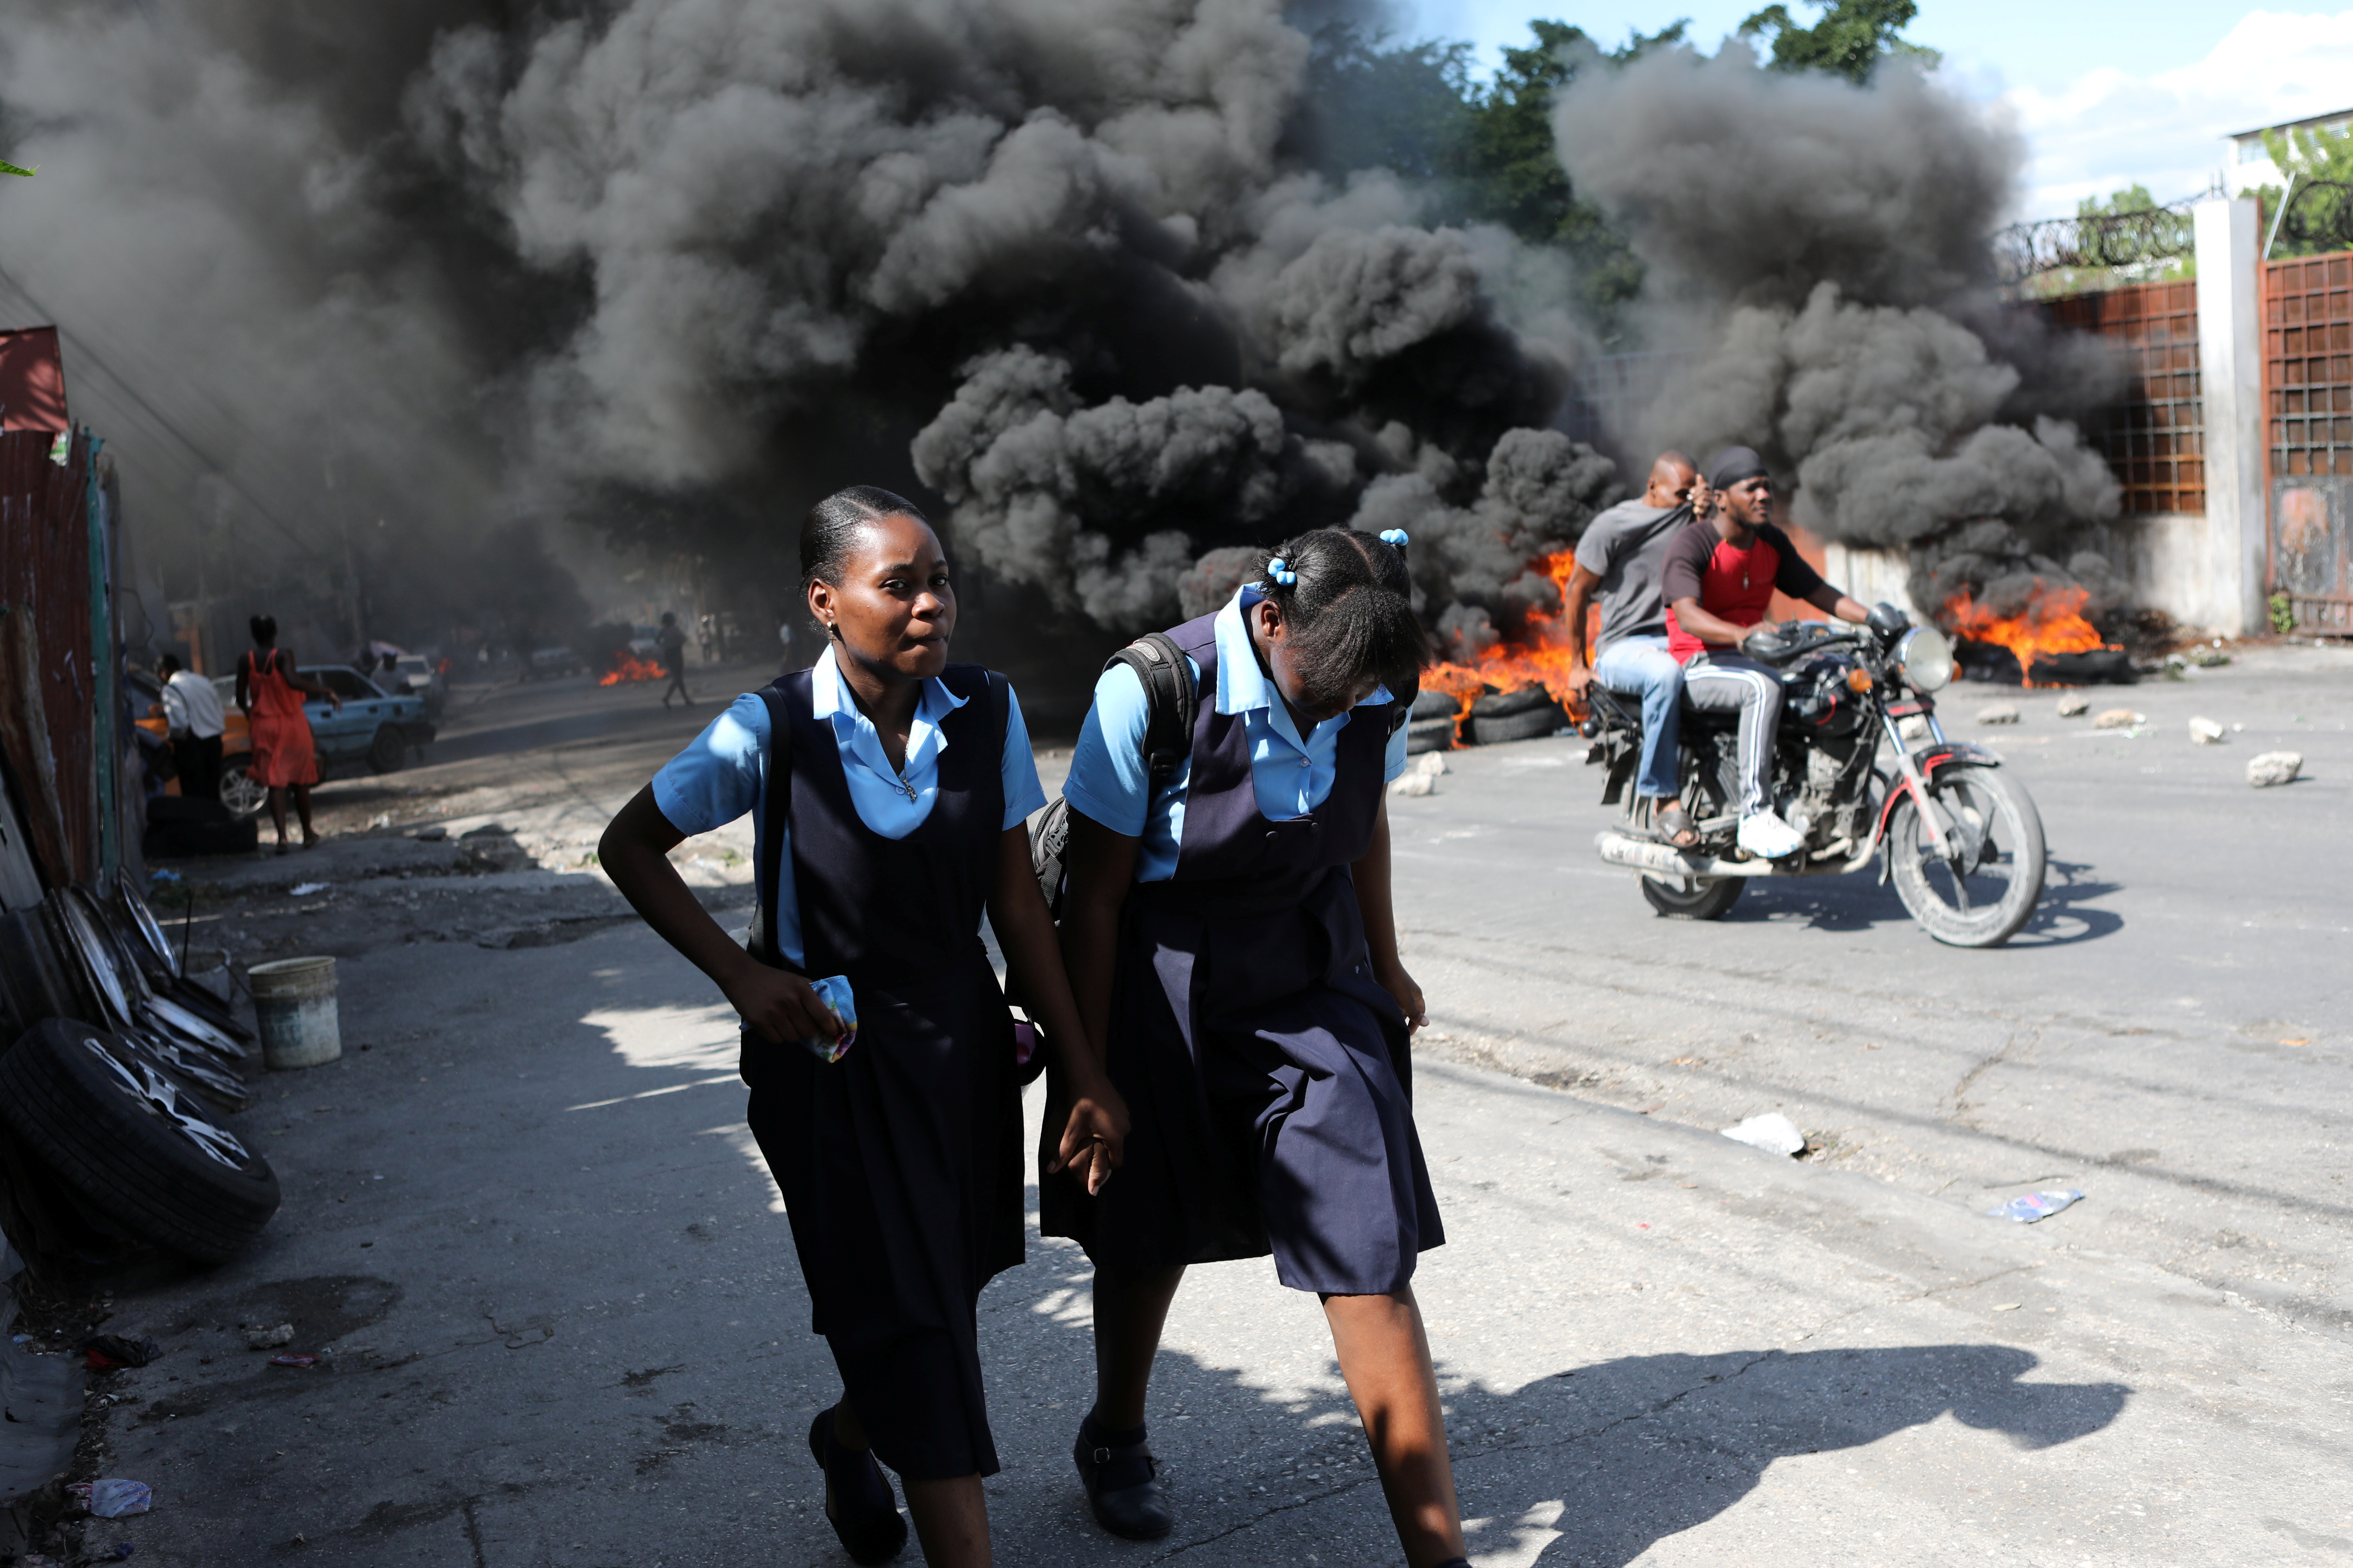 The United States Has Its Fingerprints All Over the Chaos in Haiti